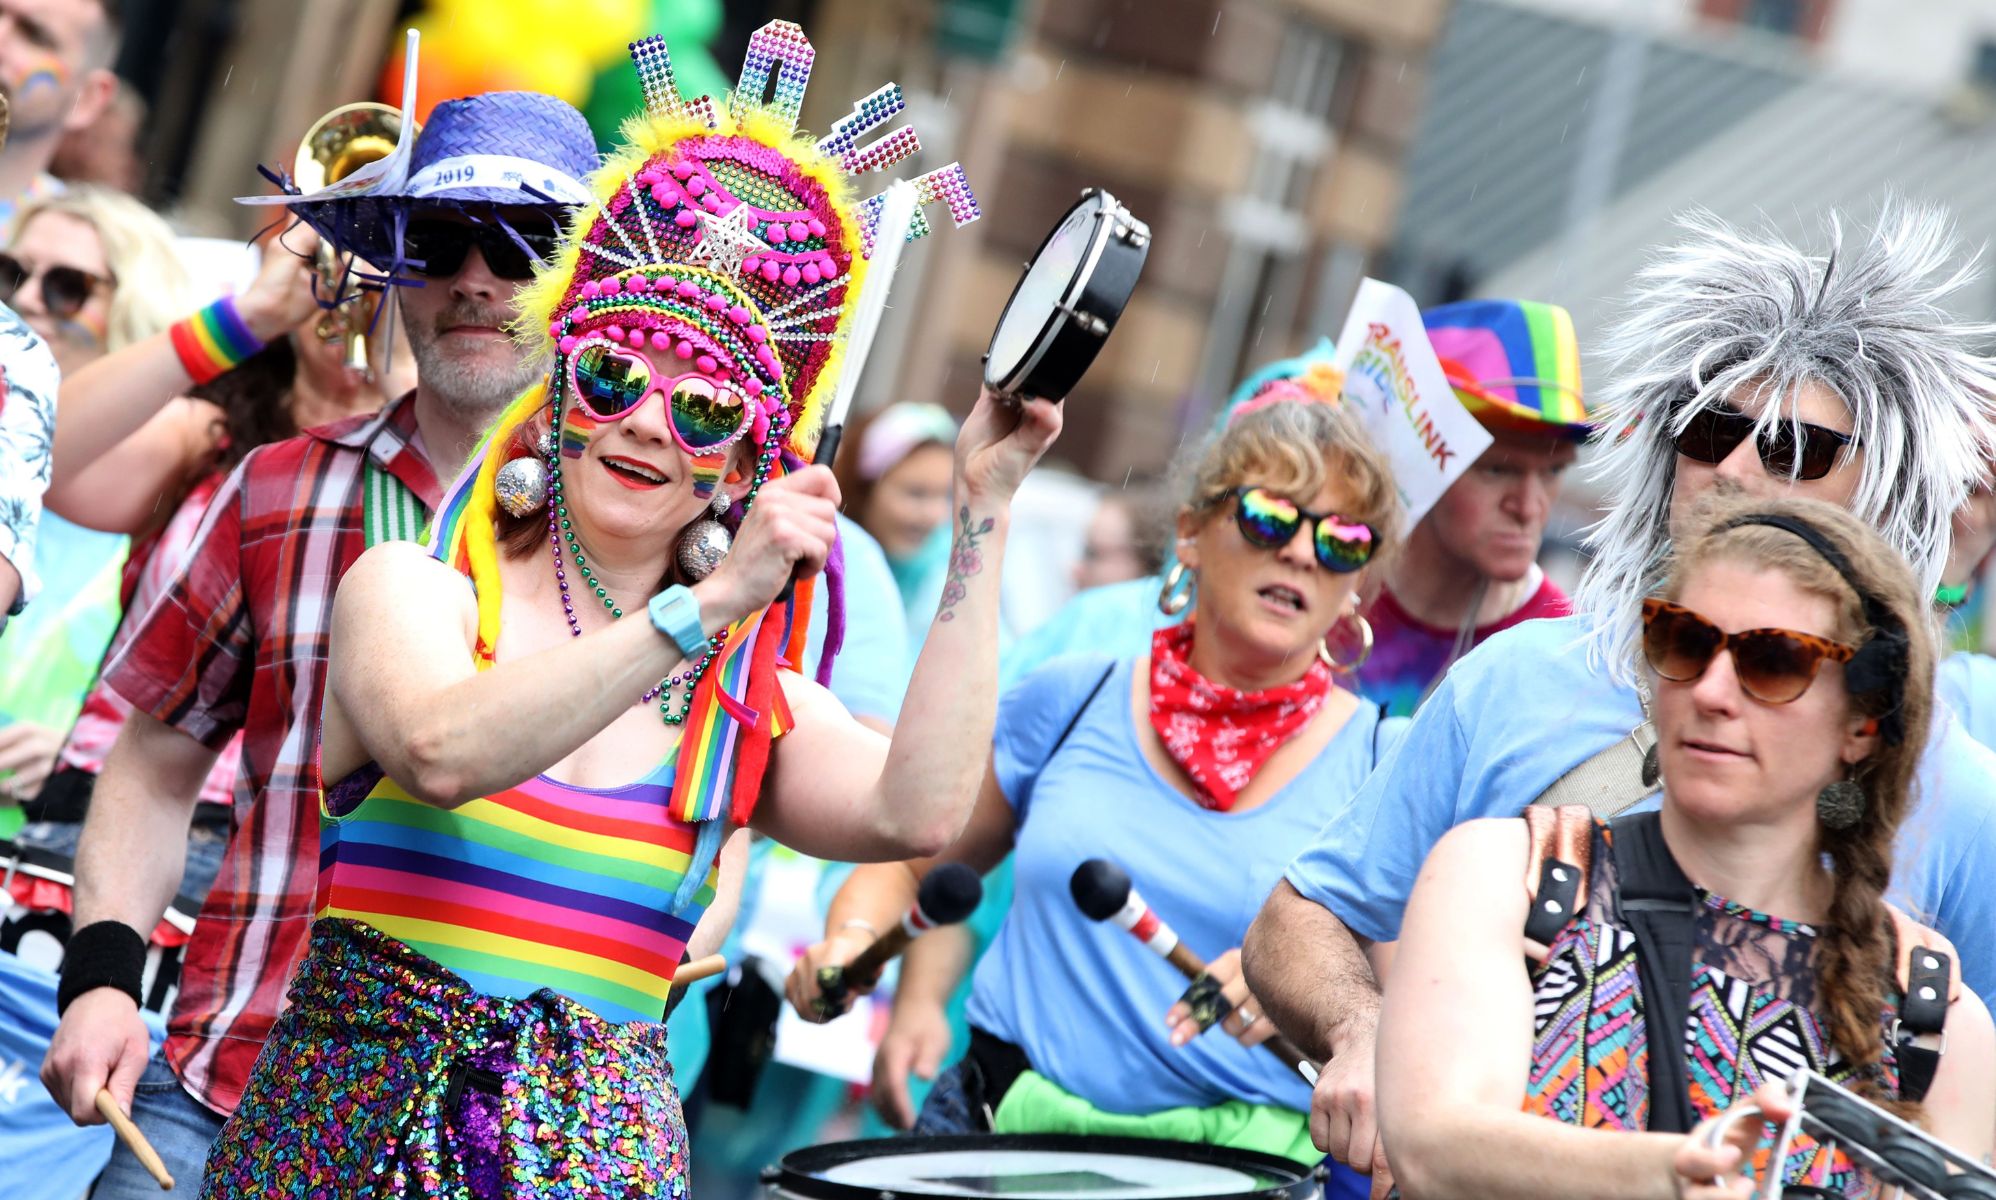 Northern Ireland is least LGBTQ country in UK, census suggests